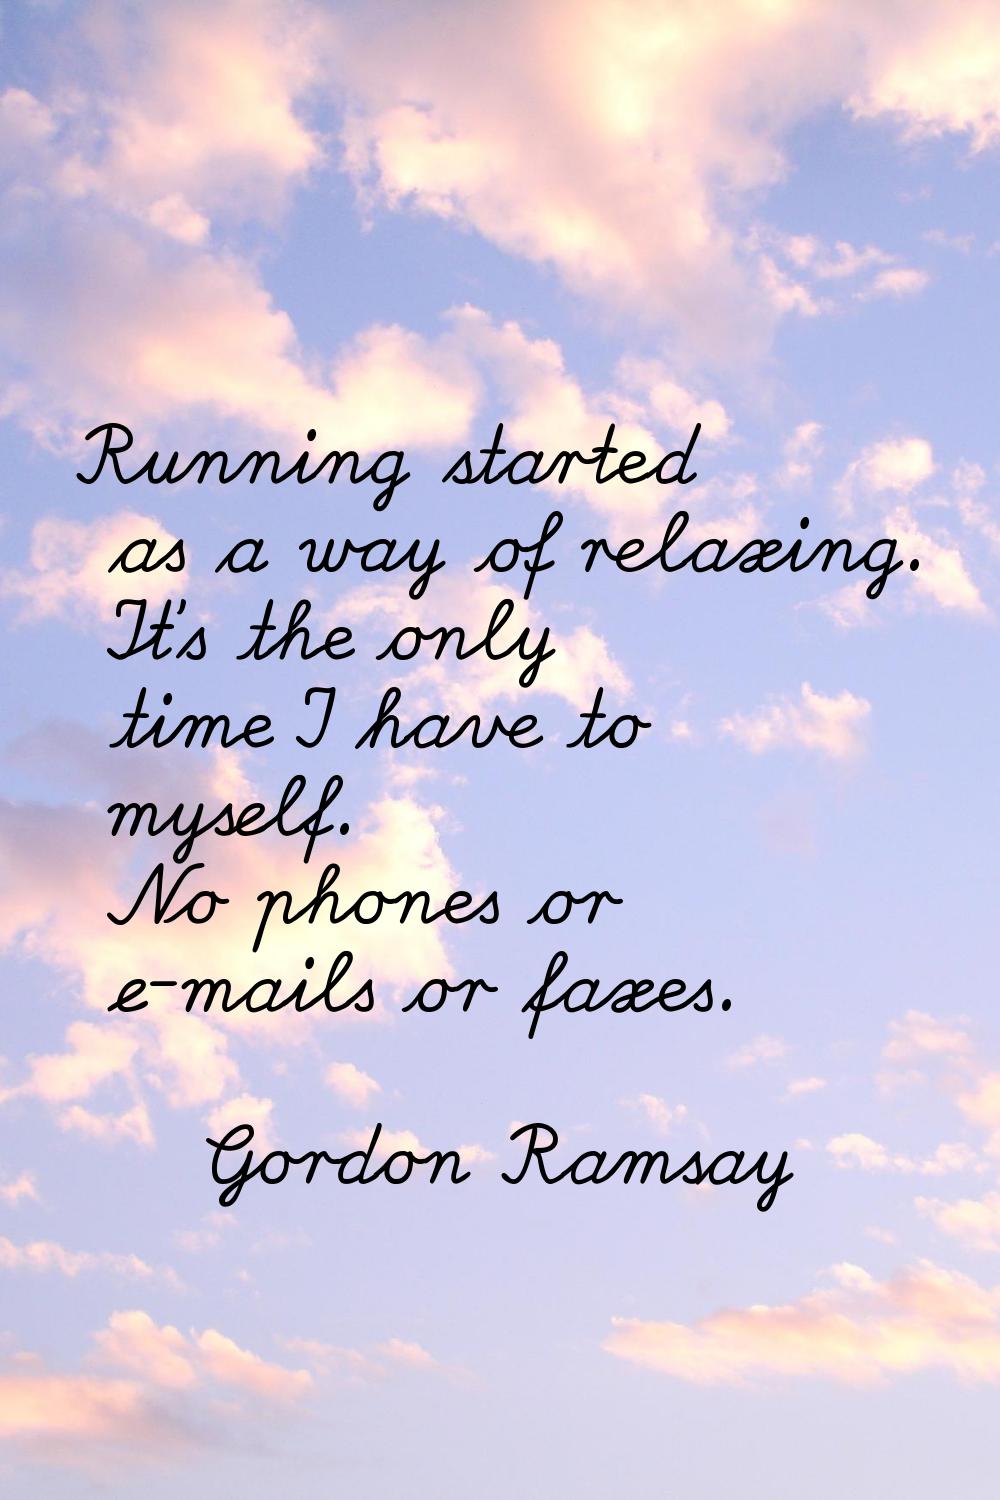 Running started as a way of relaxing. It's the only time I have to myself. No phones or e-mails or 